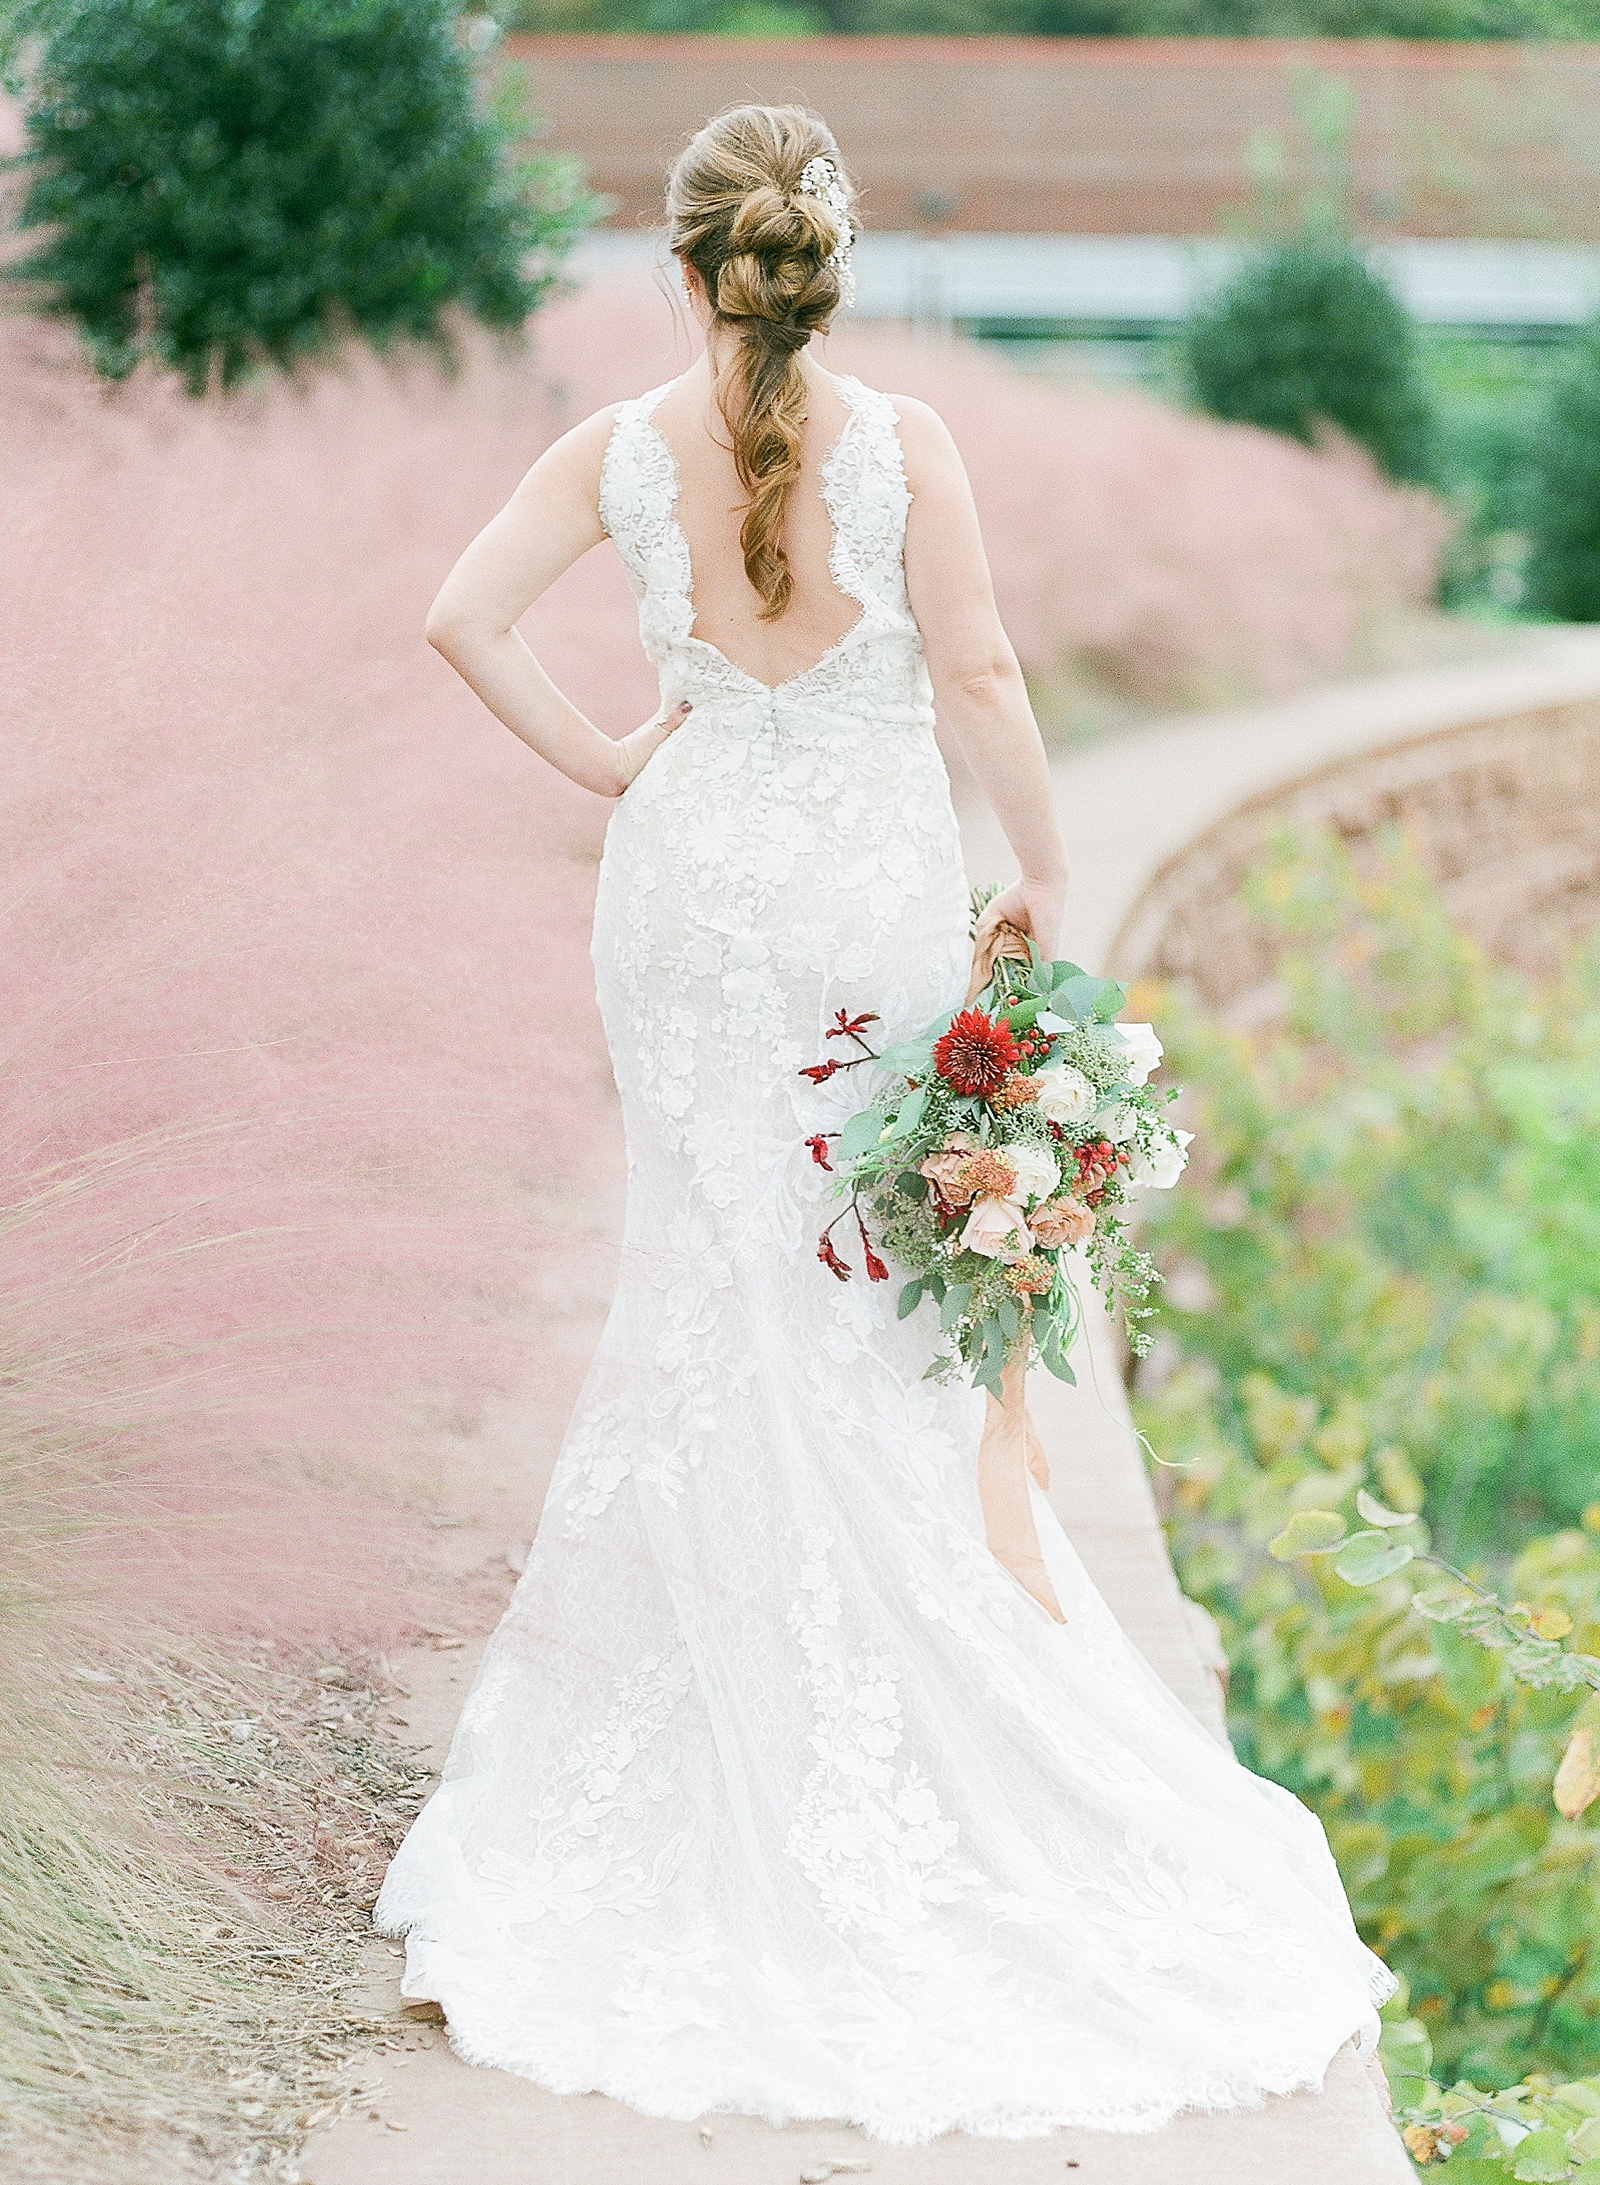 Asheville Bridal Editorial Bride From the Back Holding Bouquet Photo